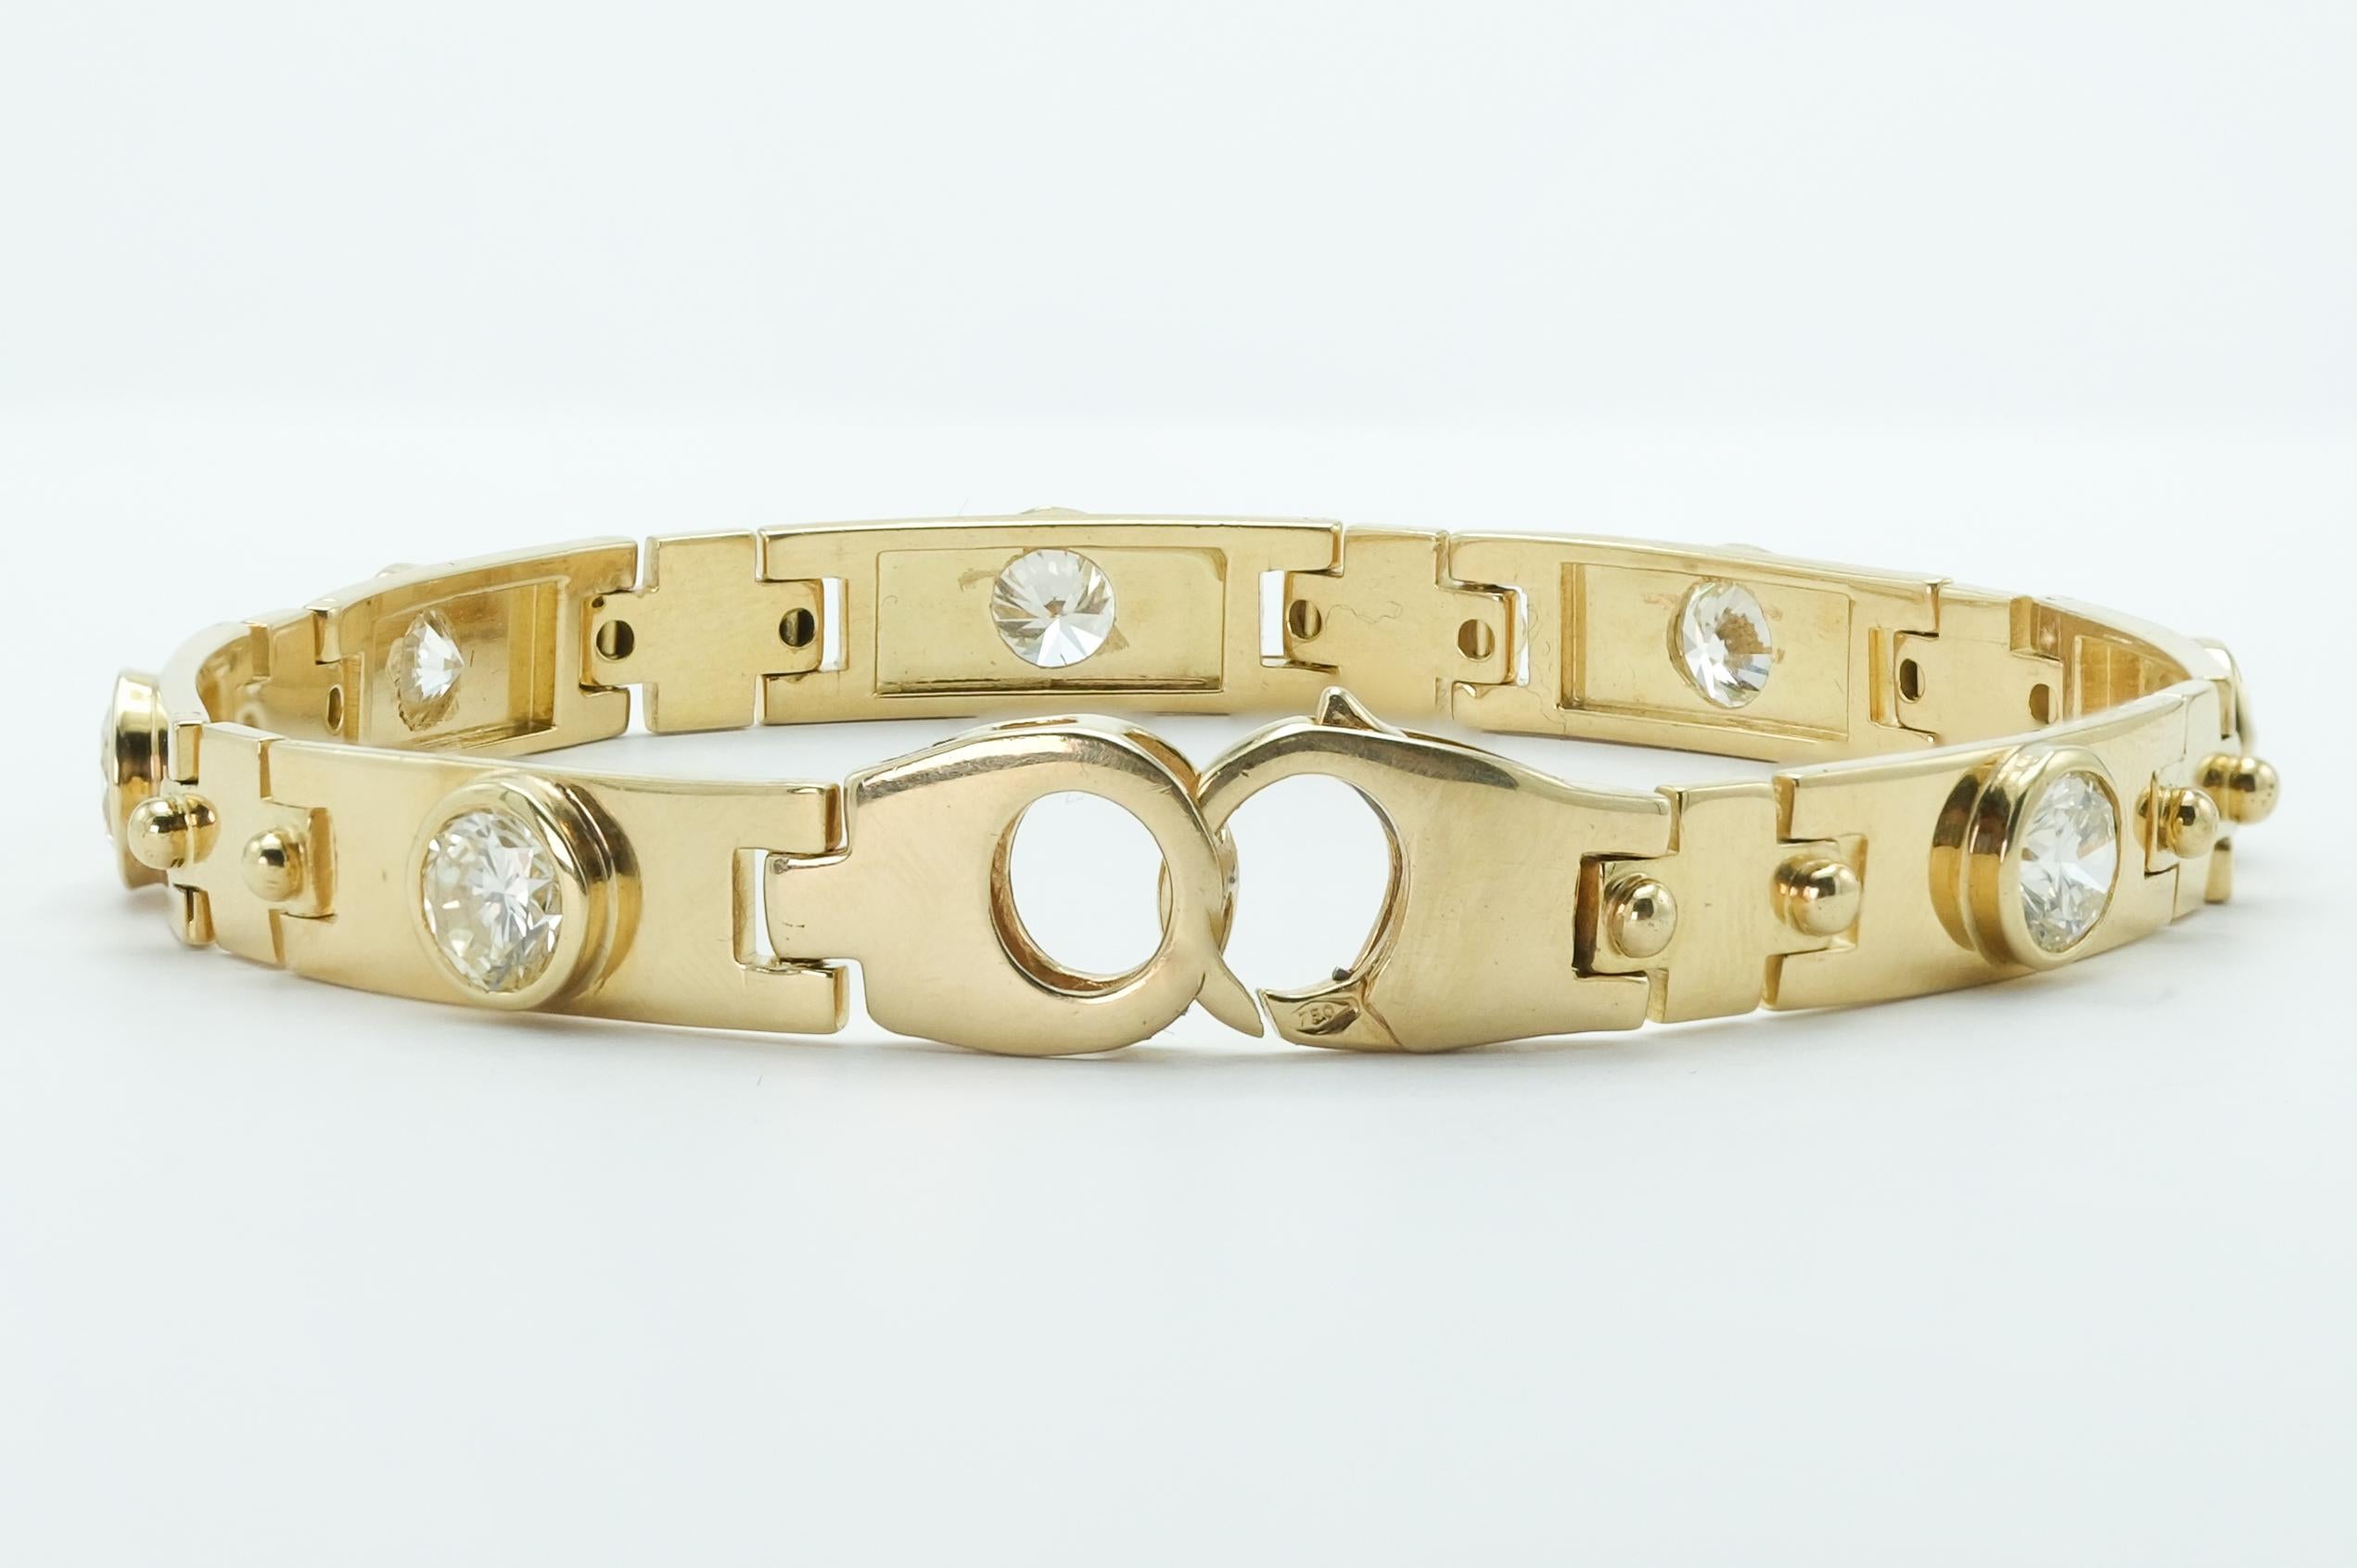 This 18 karat yellow gold bracelet showcases the finesse of Italian craftsmanship. Each of its seven distinct links features a round brilliant cut diamond, together weighing 5.5 carats. These diamonds boast a bright I color and clarity ranging from